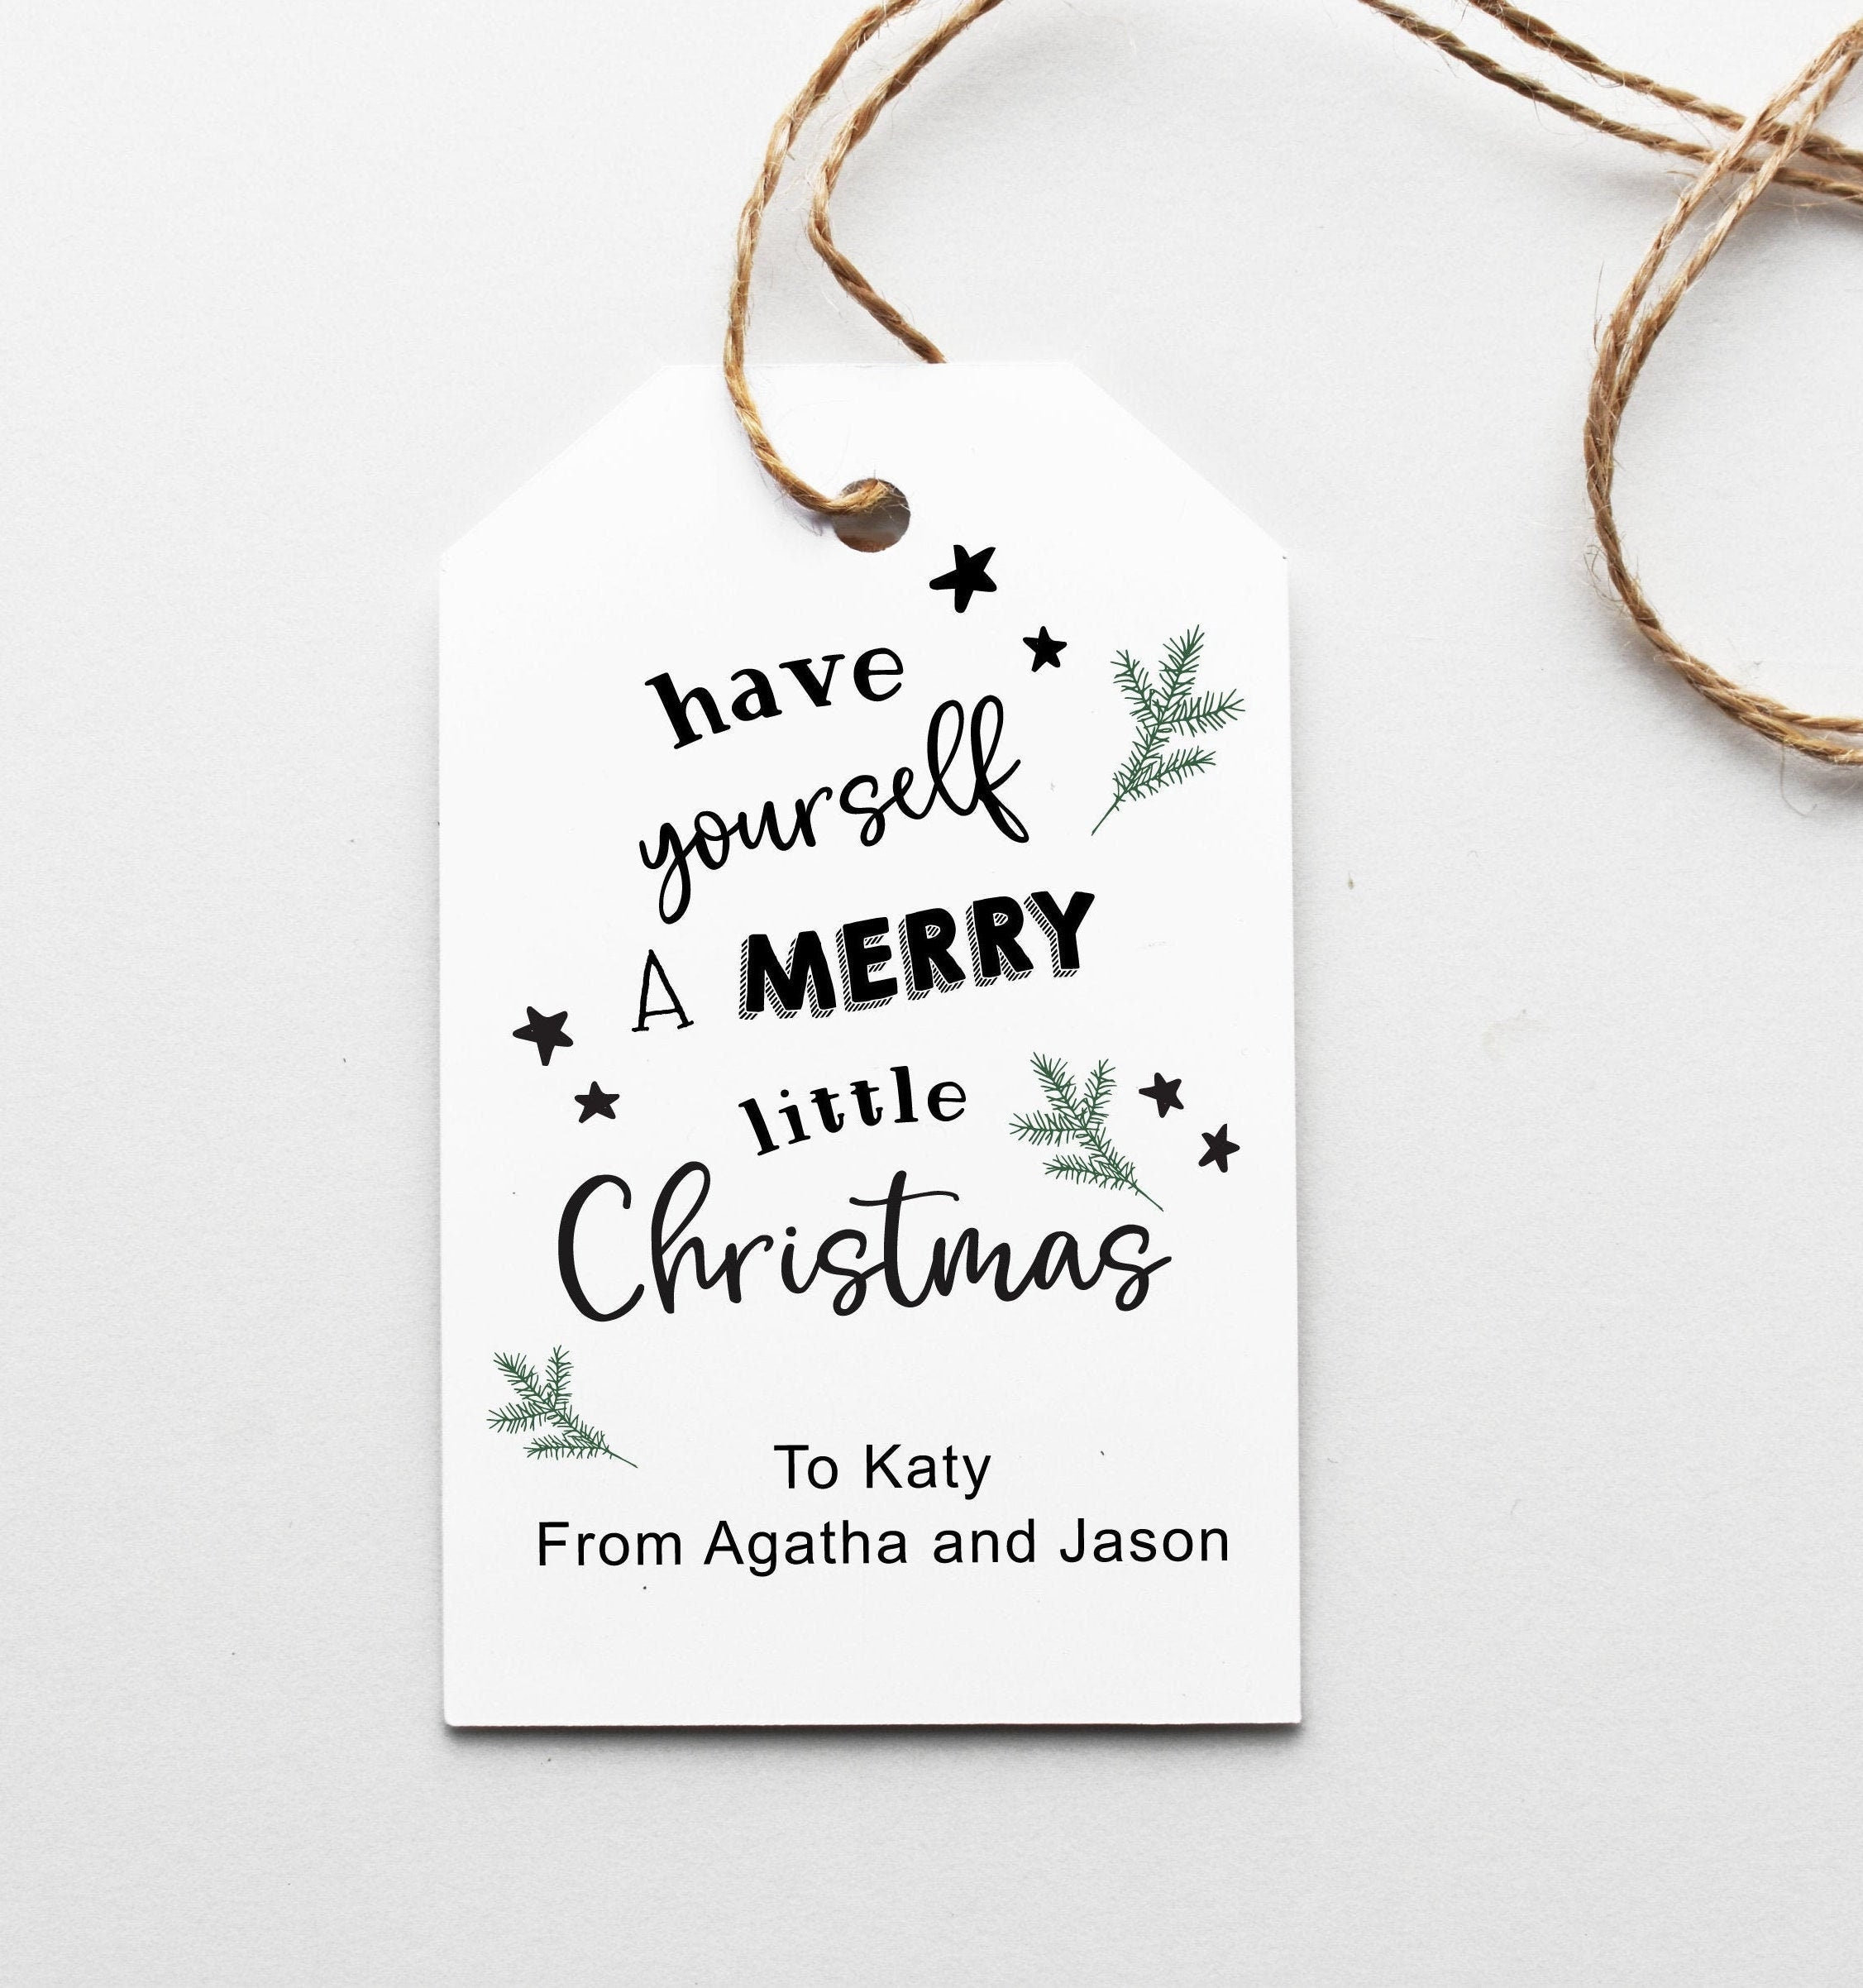 HAPPY HOLIDAYS Printable Gift Tags, Editable Personalized Favor Tags  Template Minimalist, Instant Download Labels Thank You Business Company 